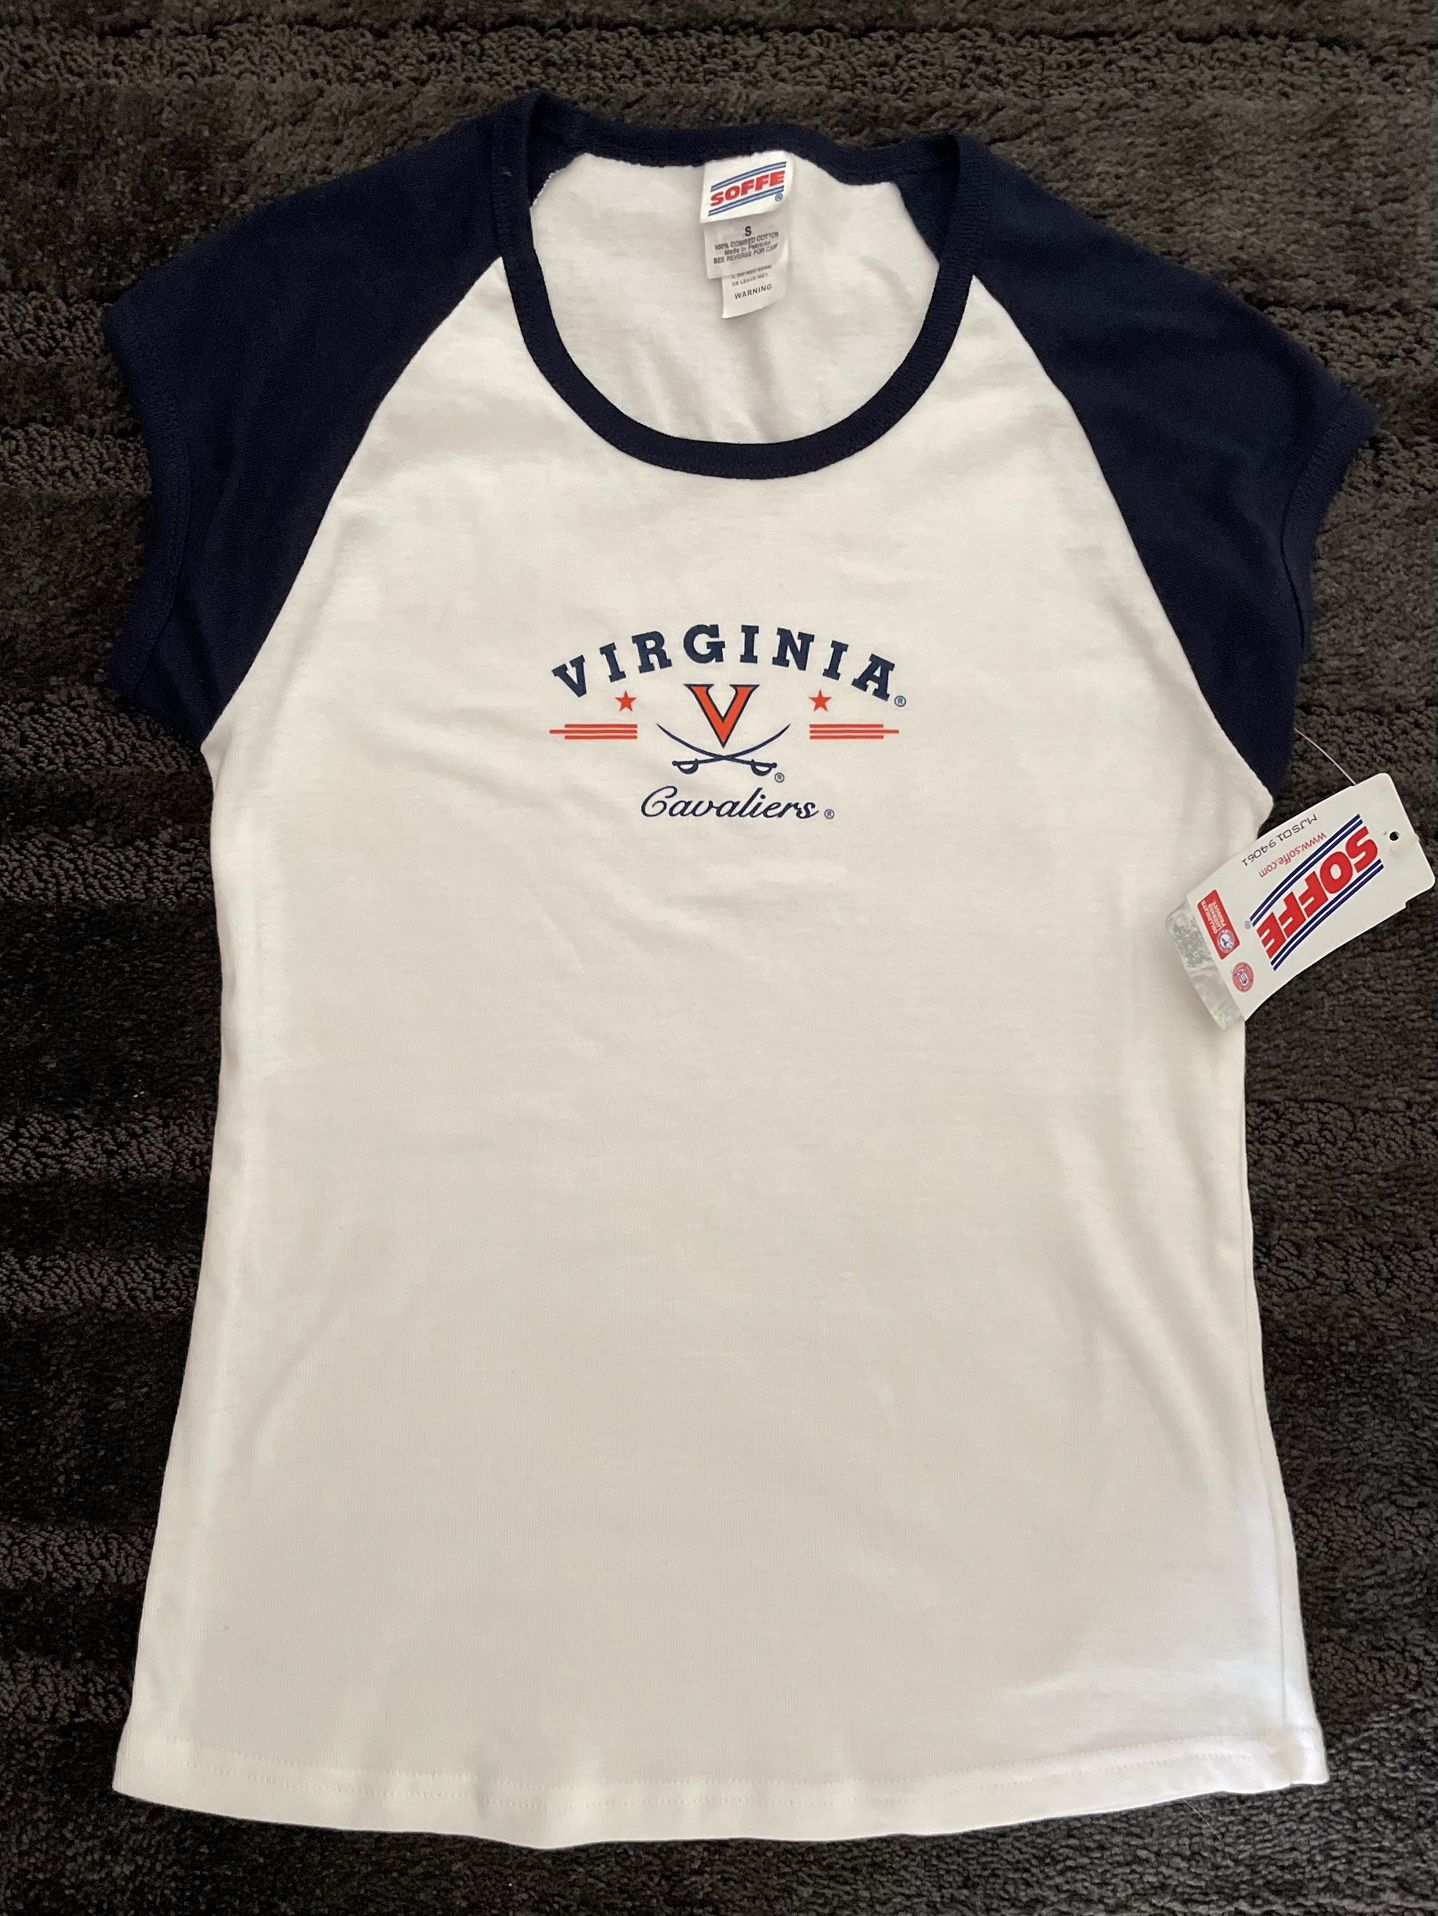 New! Virginia Cavaliers Womens T-shirt, Size Small